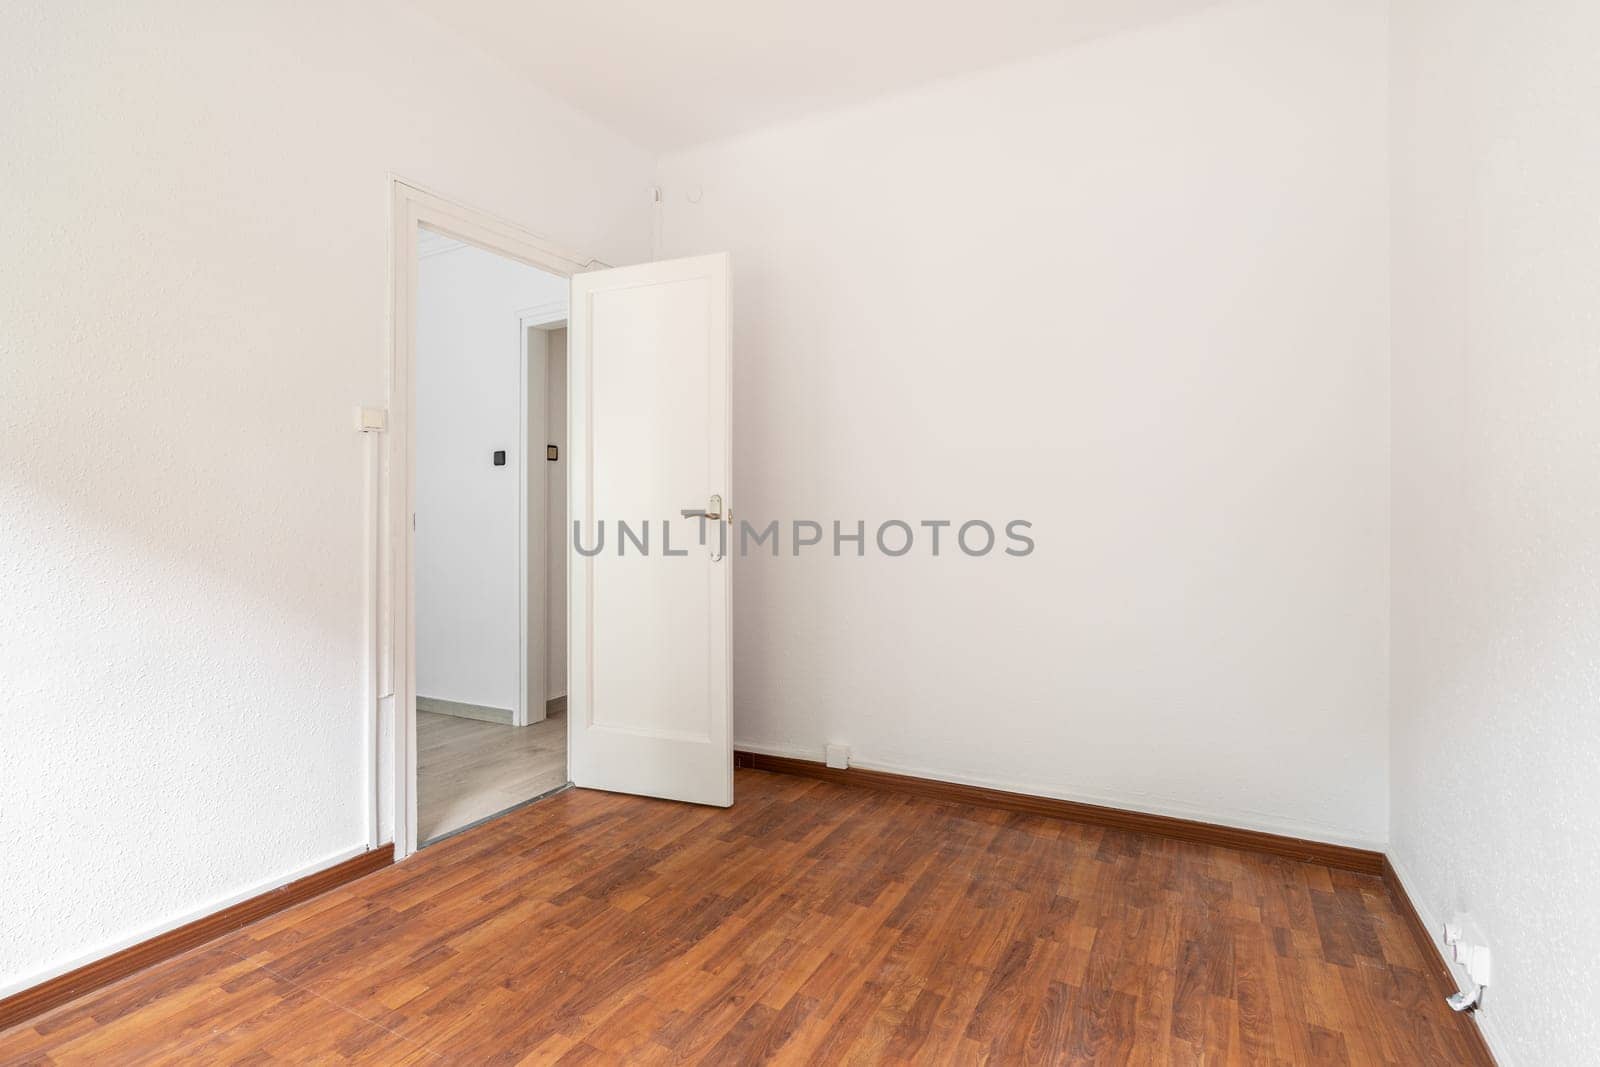 Empty spacious room well lit by daylight. The floor is dark brown wood parquet. White walls with a doorway opening onto a corridor. Through the open door you can see part of the rest of the apartment. by apavlin